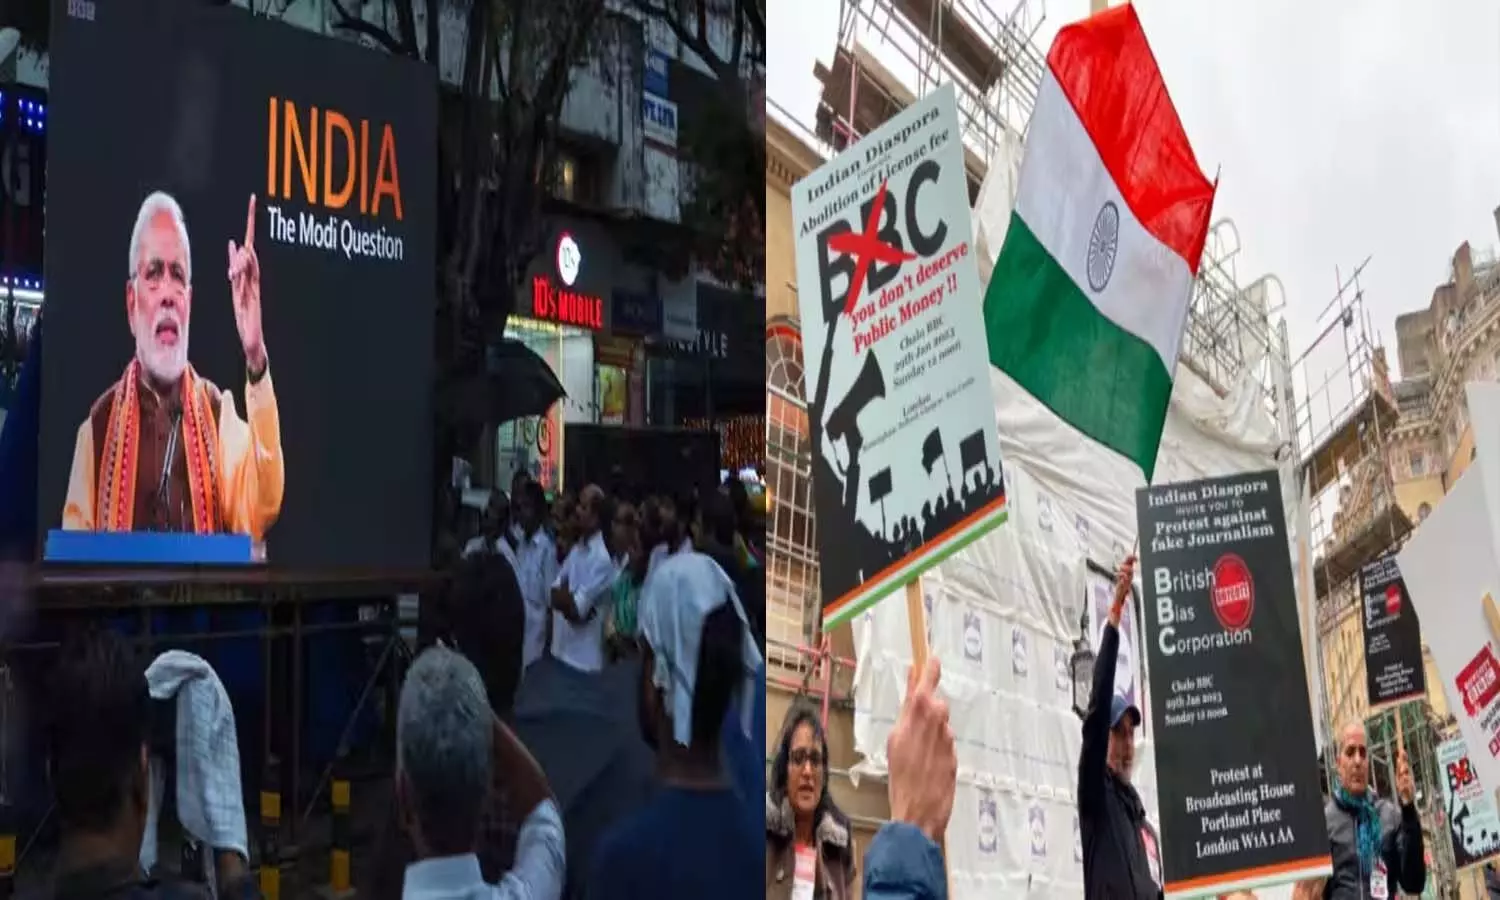 Protest against BBC documentary made by targeting PM Narendra Modi has started in UK too